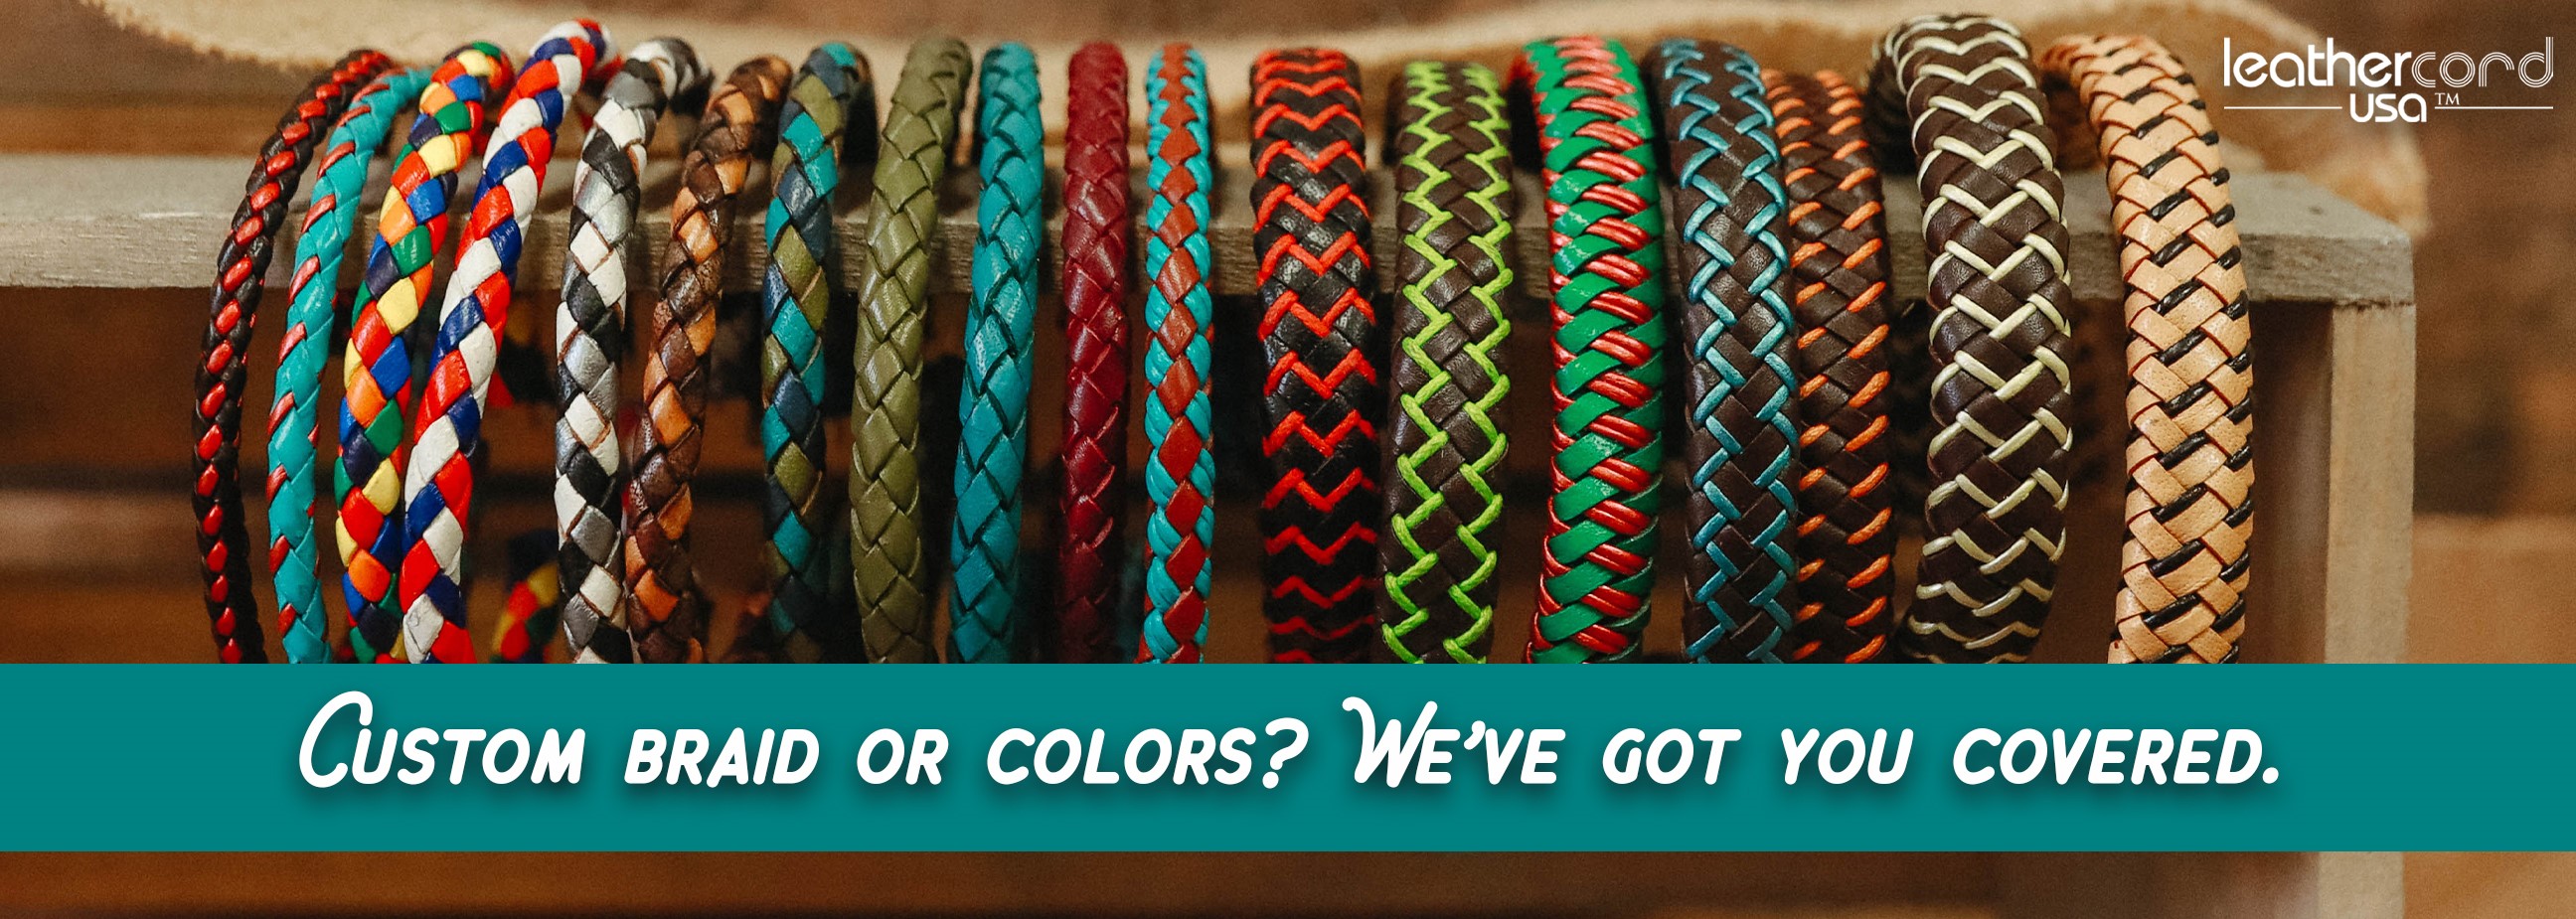 Leather Cord Wholesale Supplier